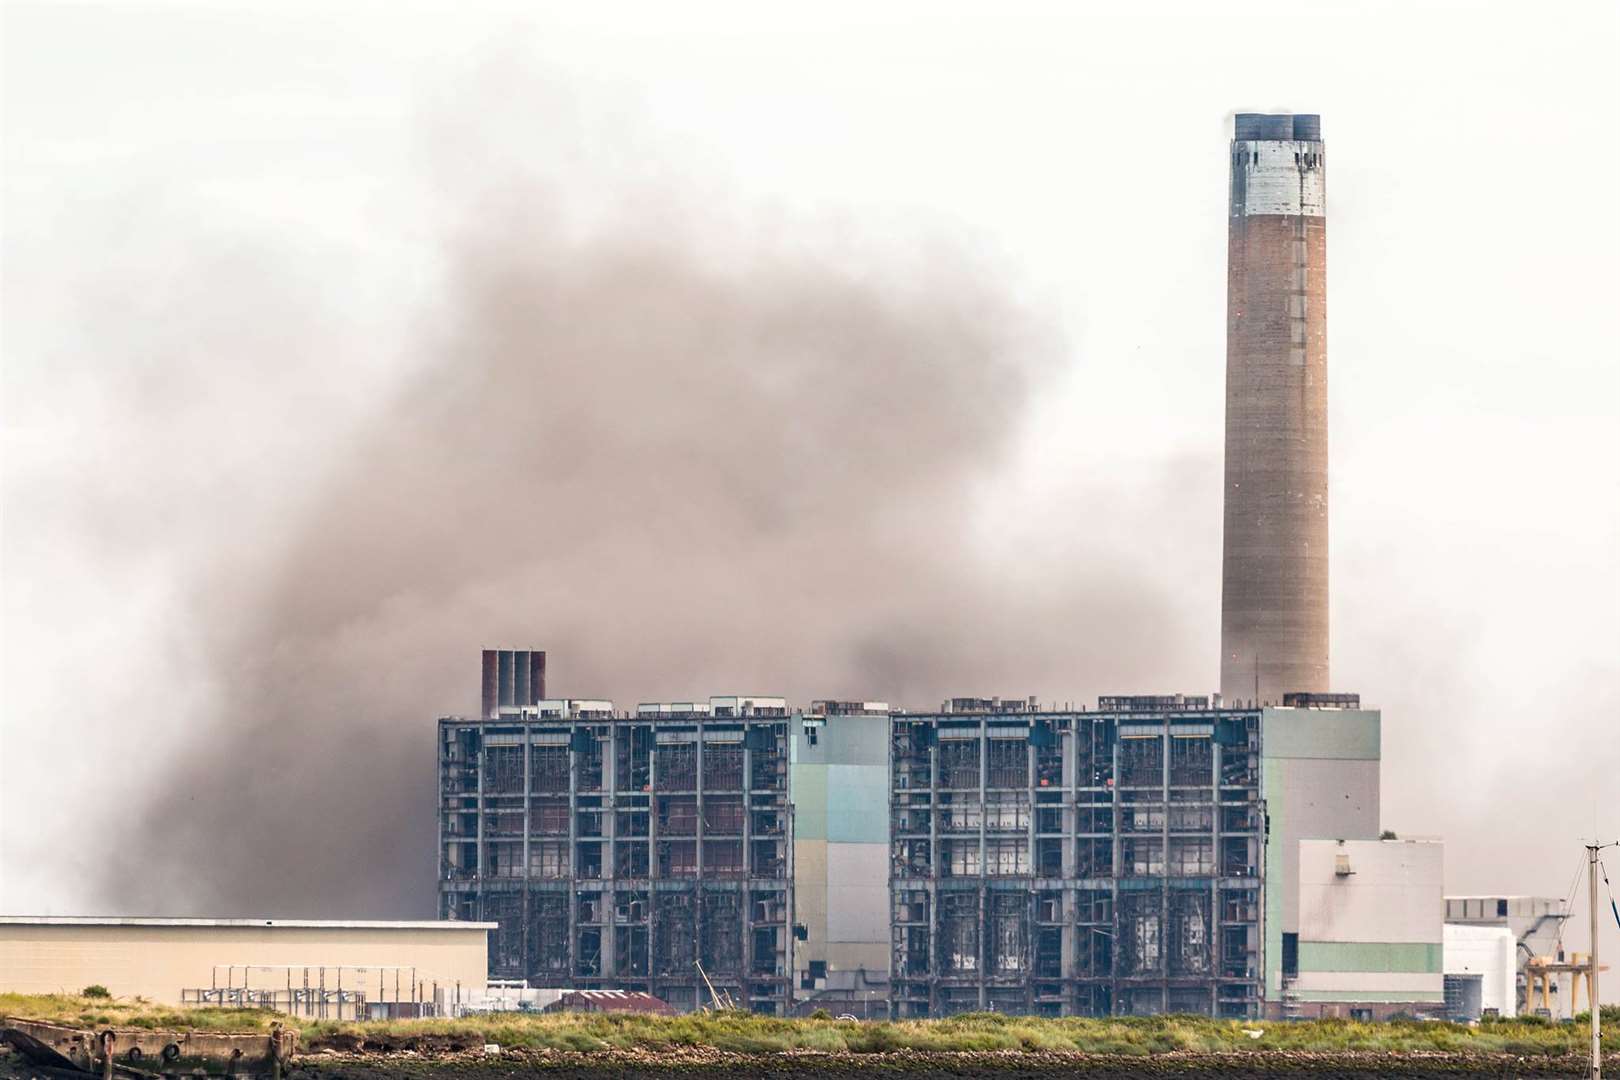 Demolition took place at Kingsnorth Power Station in April this year, but the main tower isn't due to come down until 2017